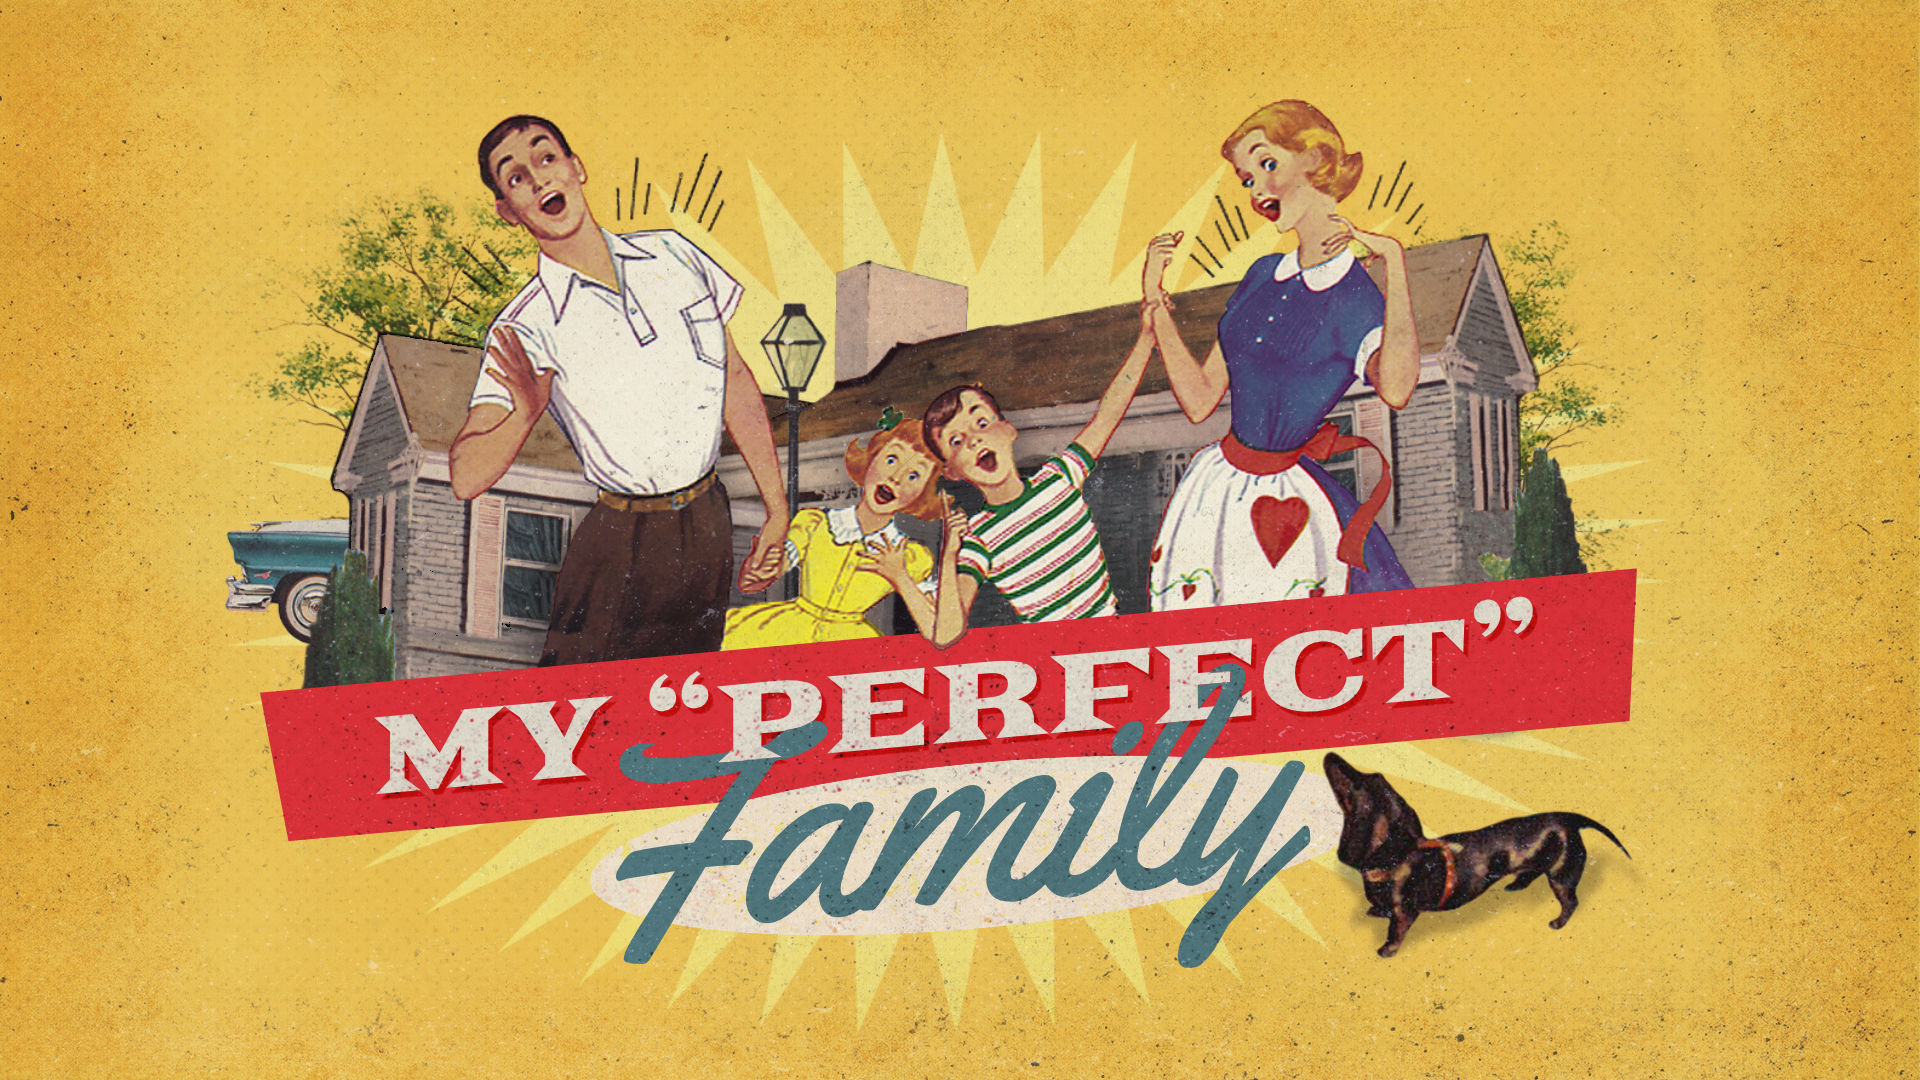 My “Perfect” Family • May 5 - June 16, 2019